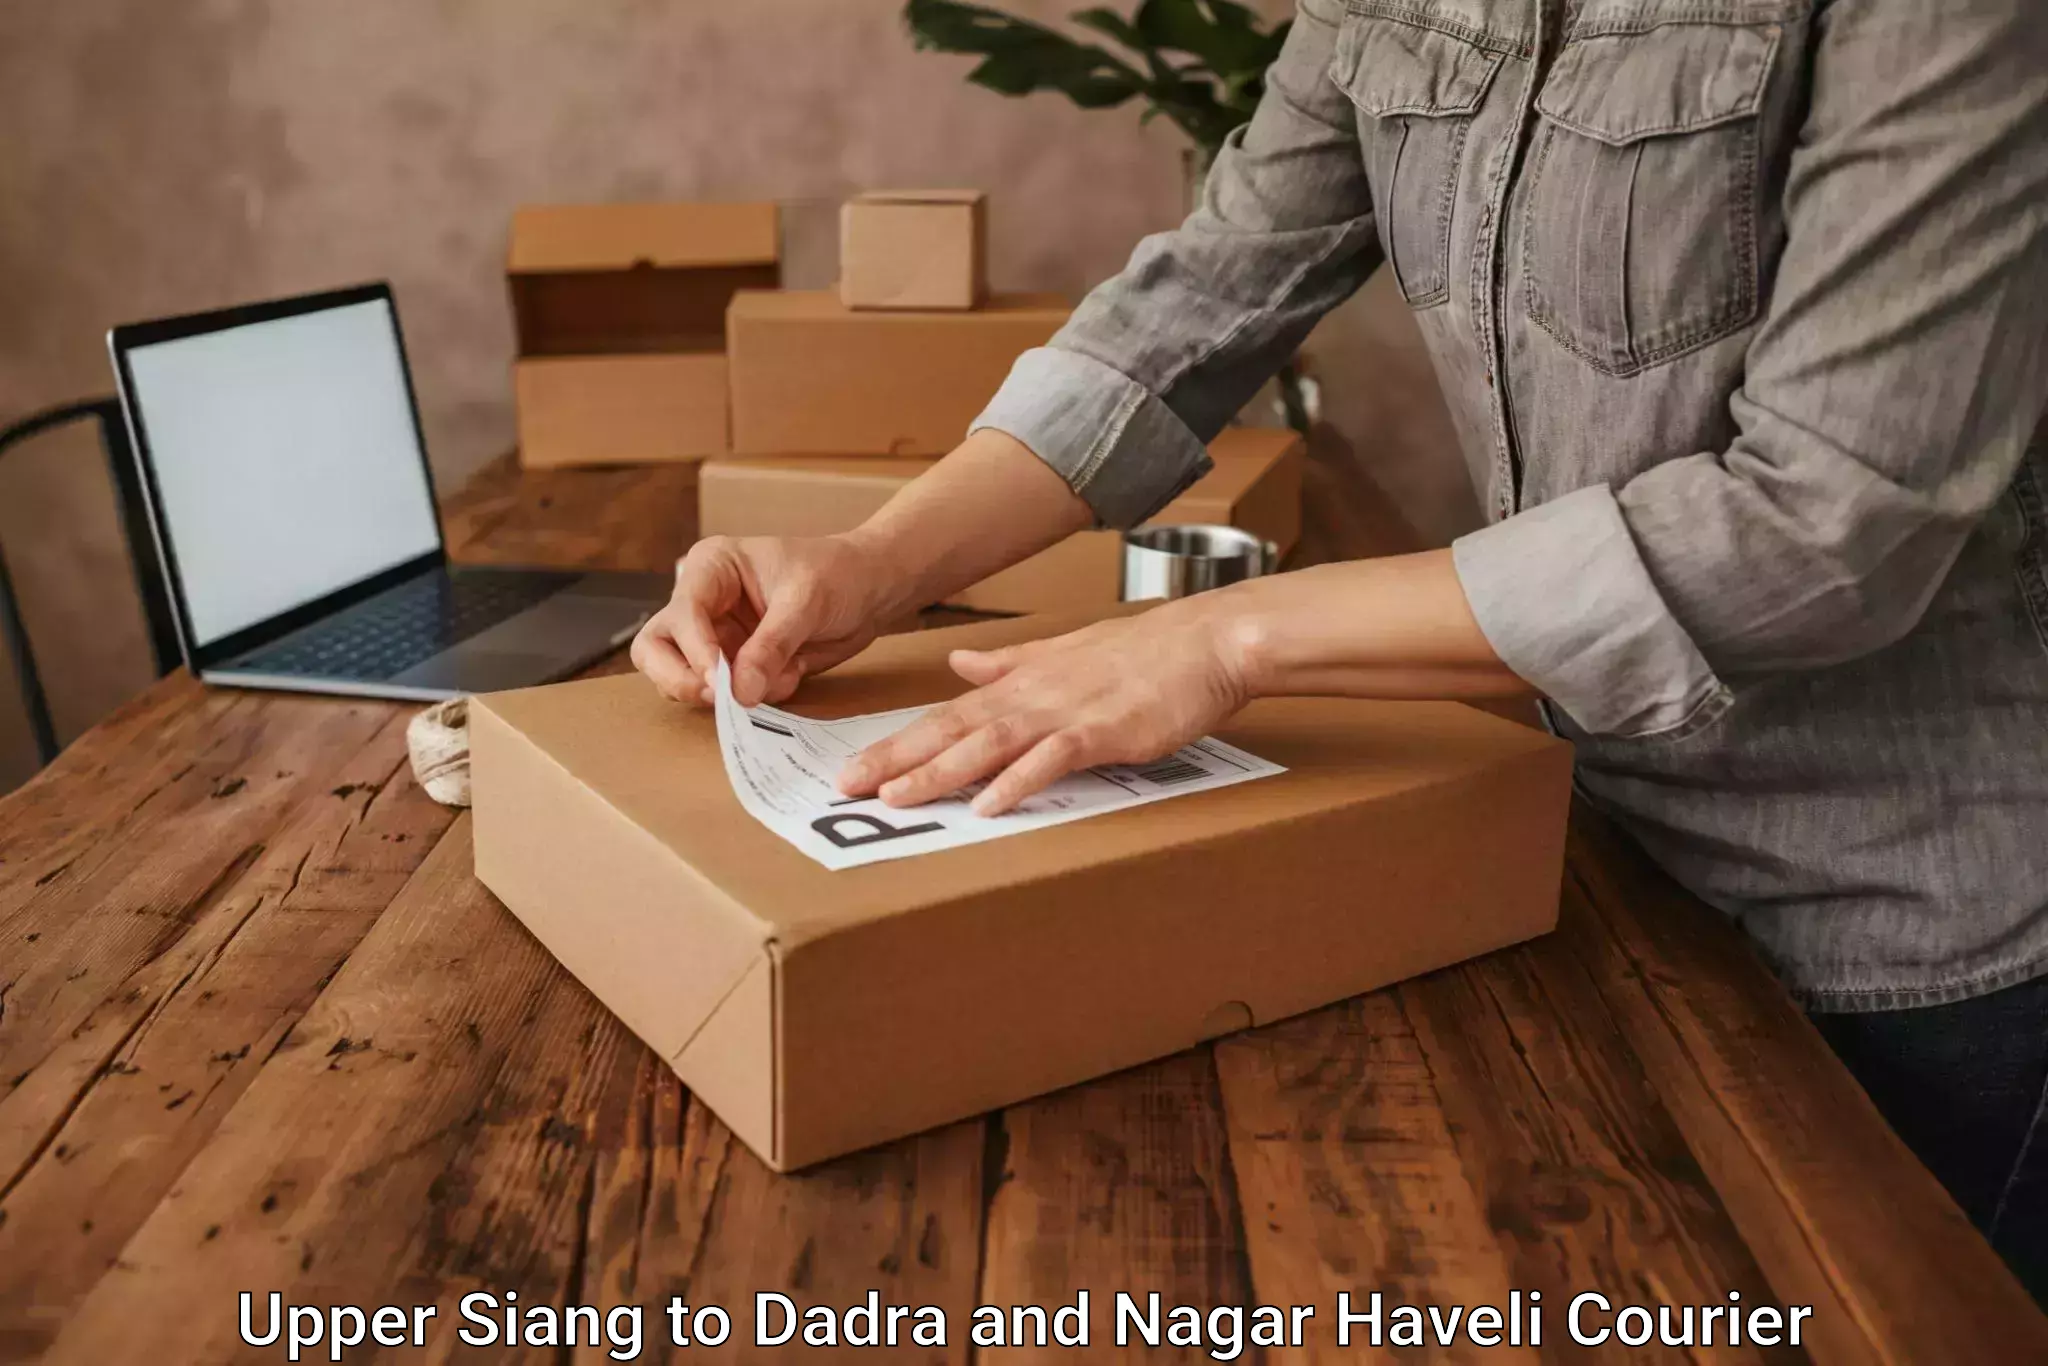 Courier service comparison in Upper Siang to Dadra and Nagar Haveli